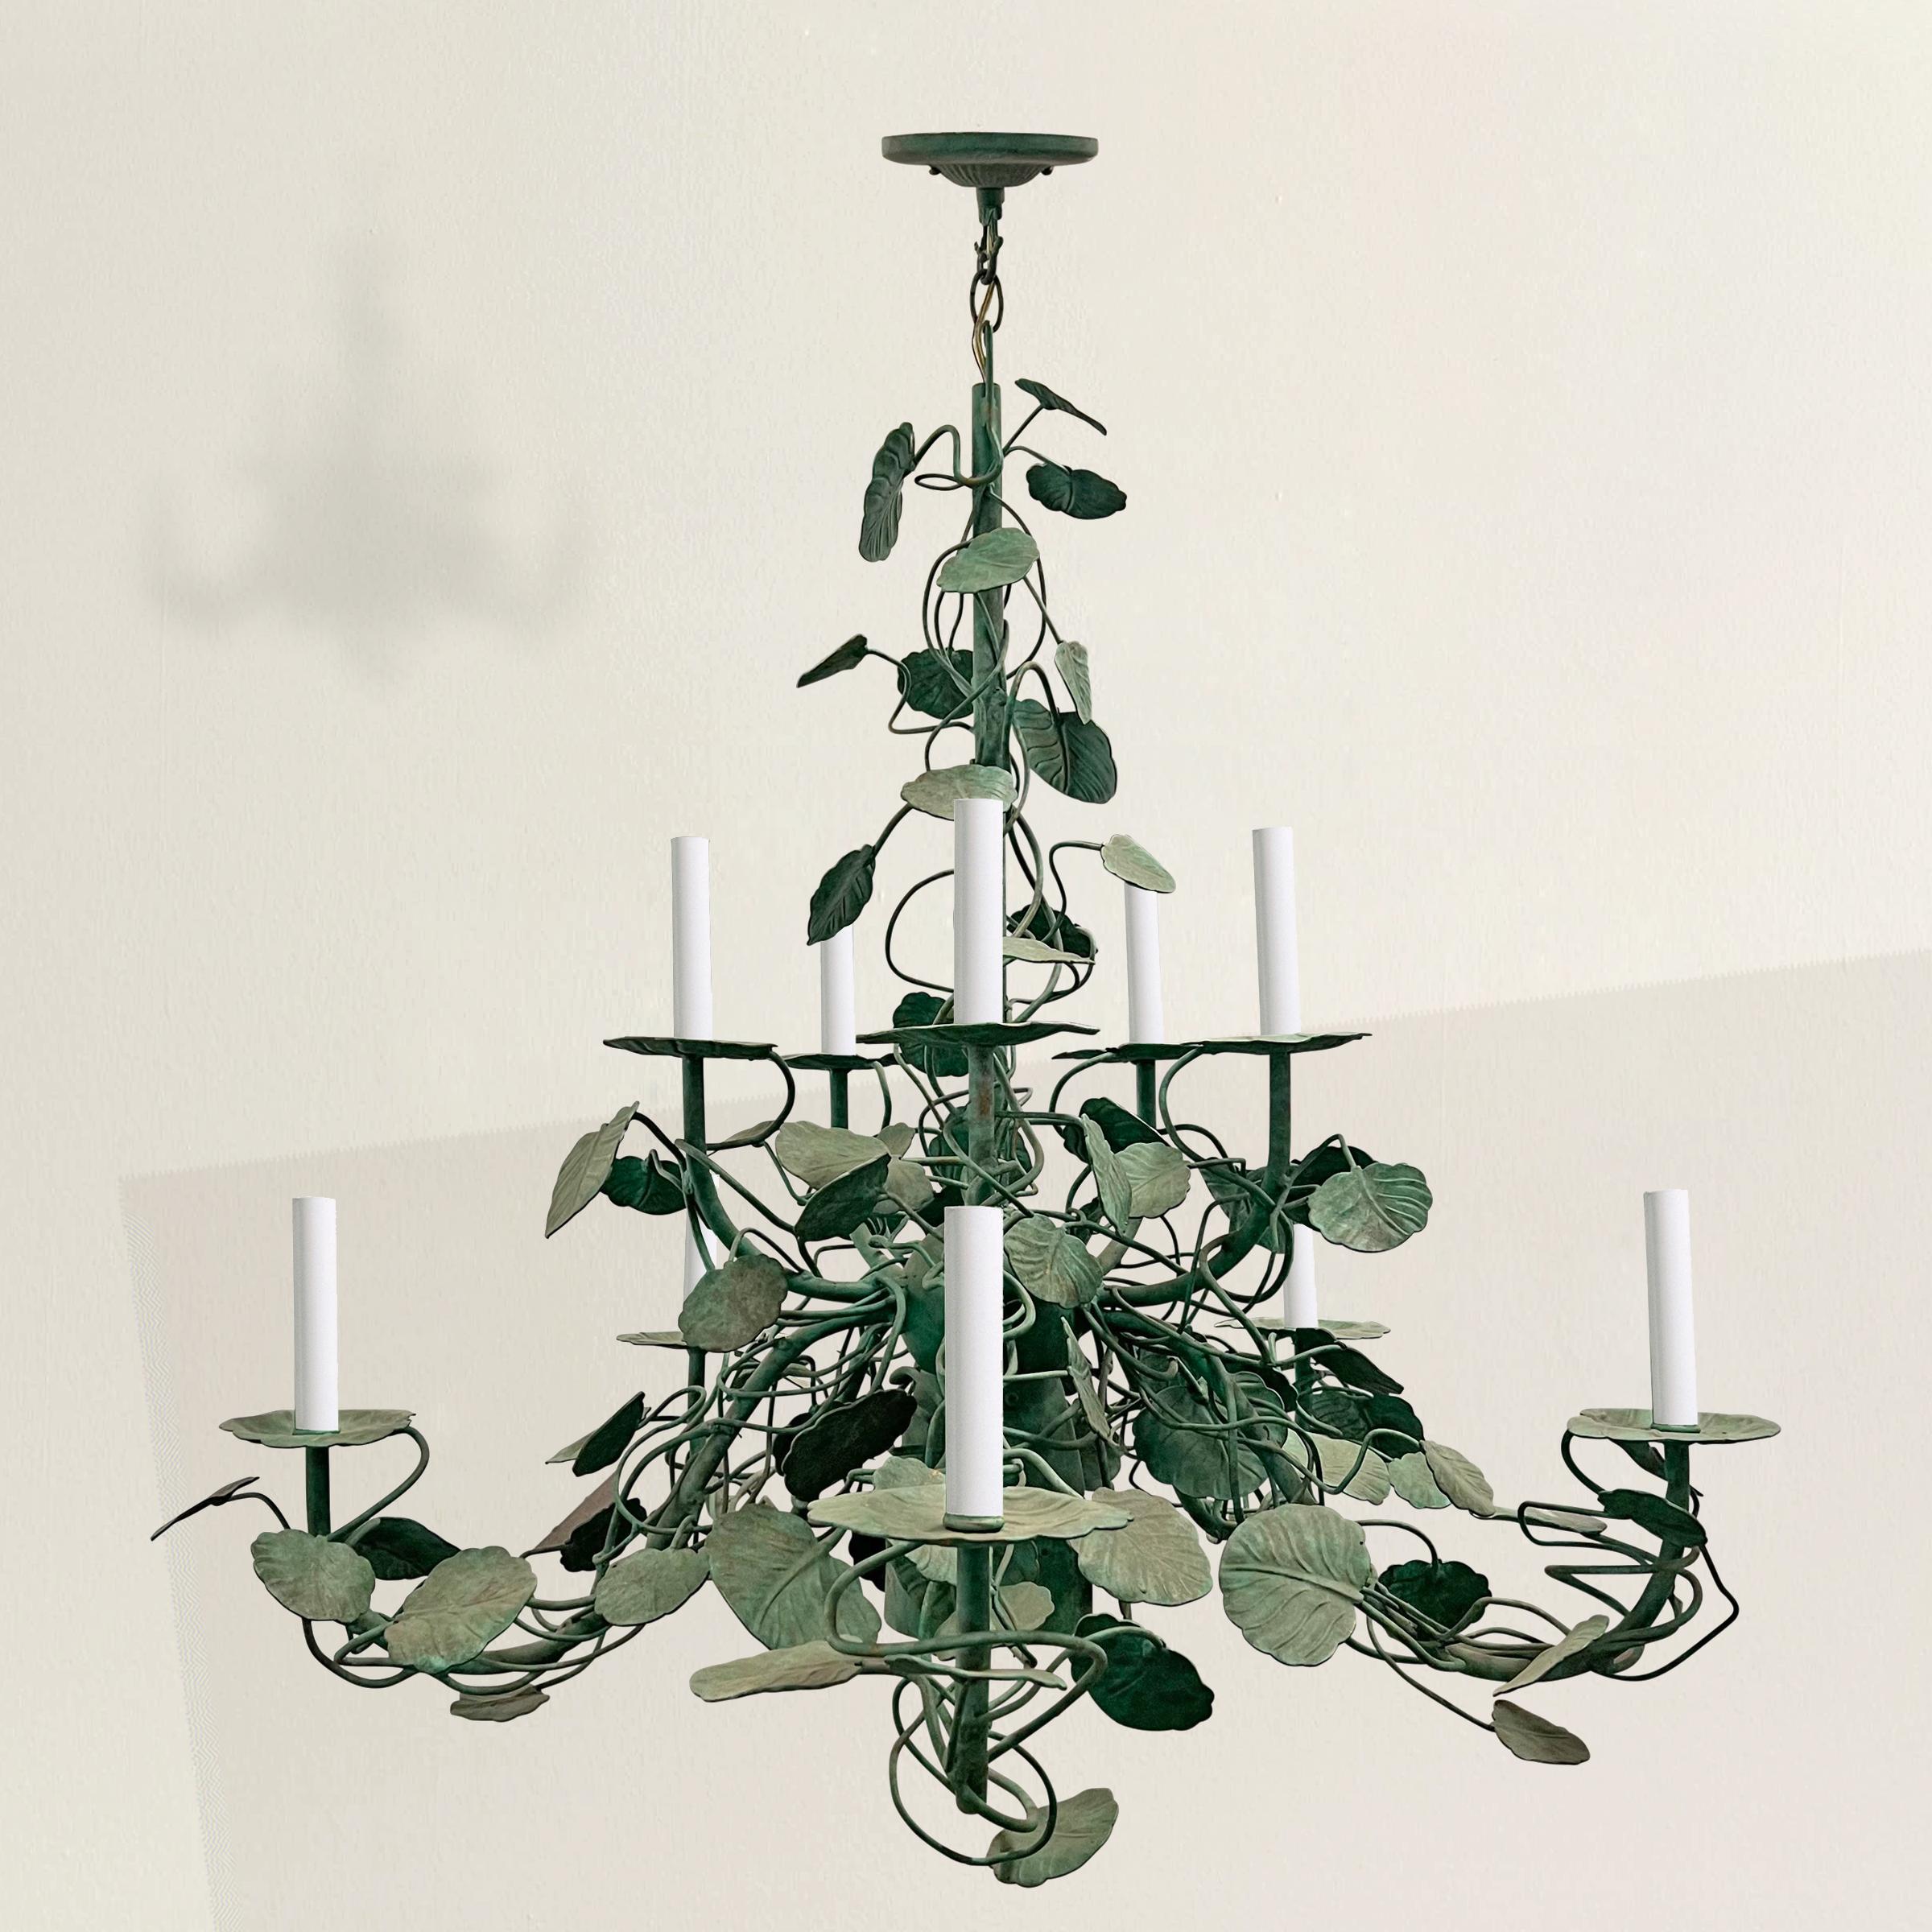 Behold the exquisite craftsmanship of this American ten-arm garden vine chandelier, a true masterpiece that seamlessly marries artistry and functionality. Each arm is adorned with hand-wrought scrolling vines and delicately detailed leaves, creating